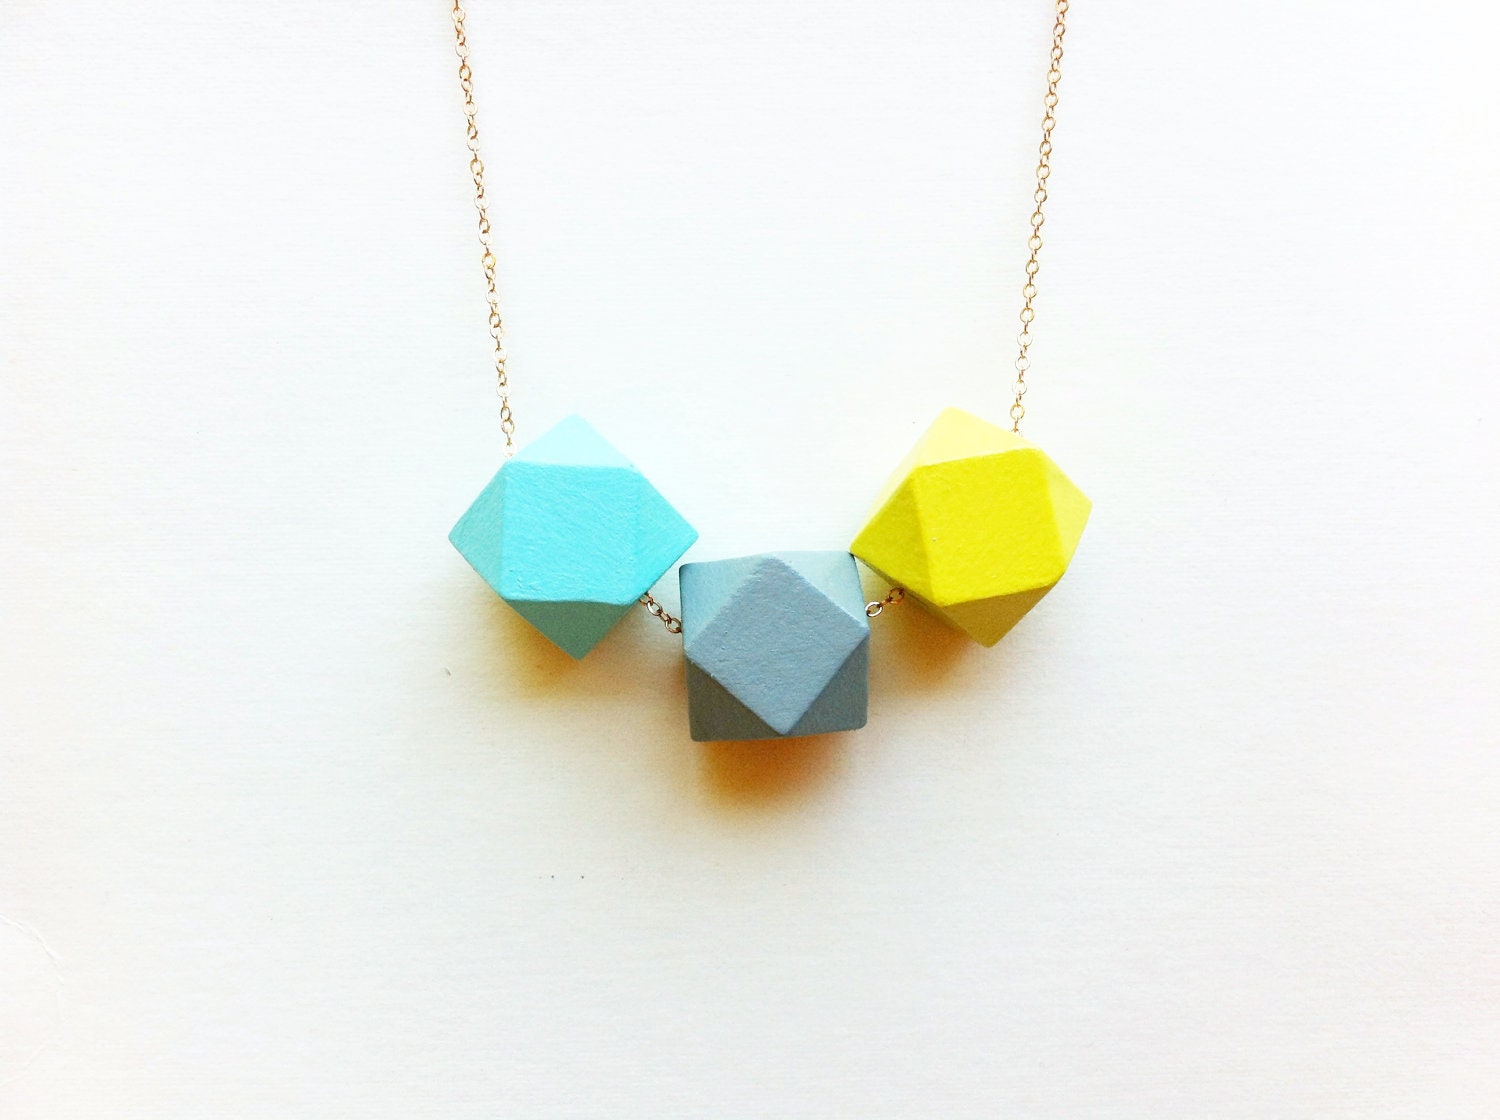 Neon Faceted Wood Necklace in Aqua, Gray and Yellow / Minimalist Bright Jewelry / Color Block - FableAndLore